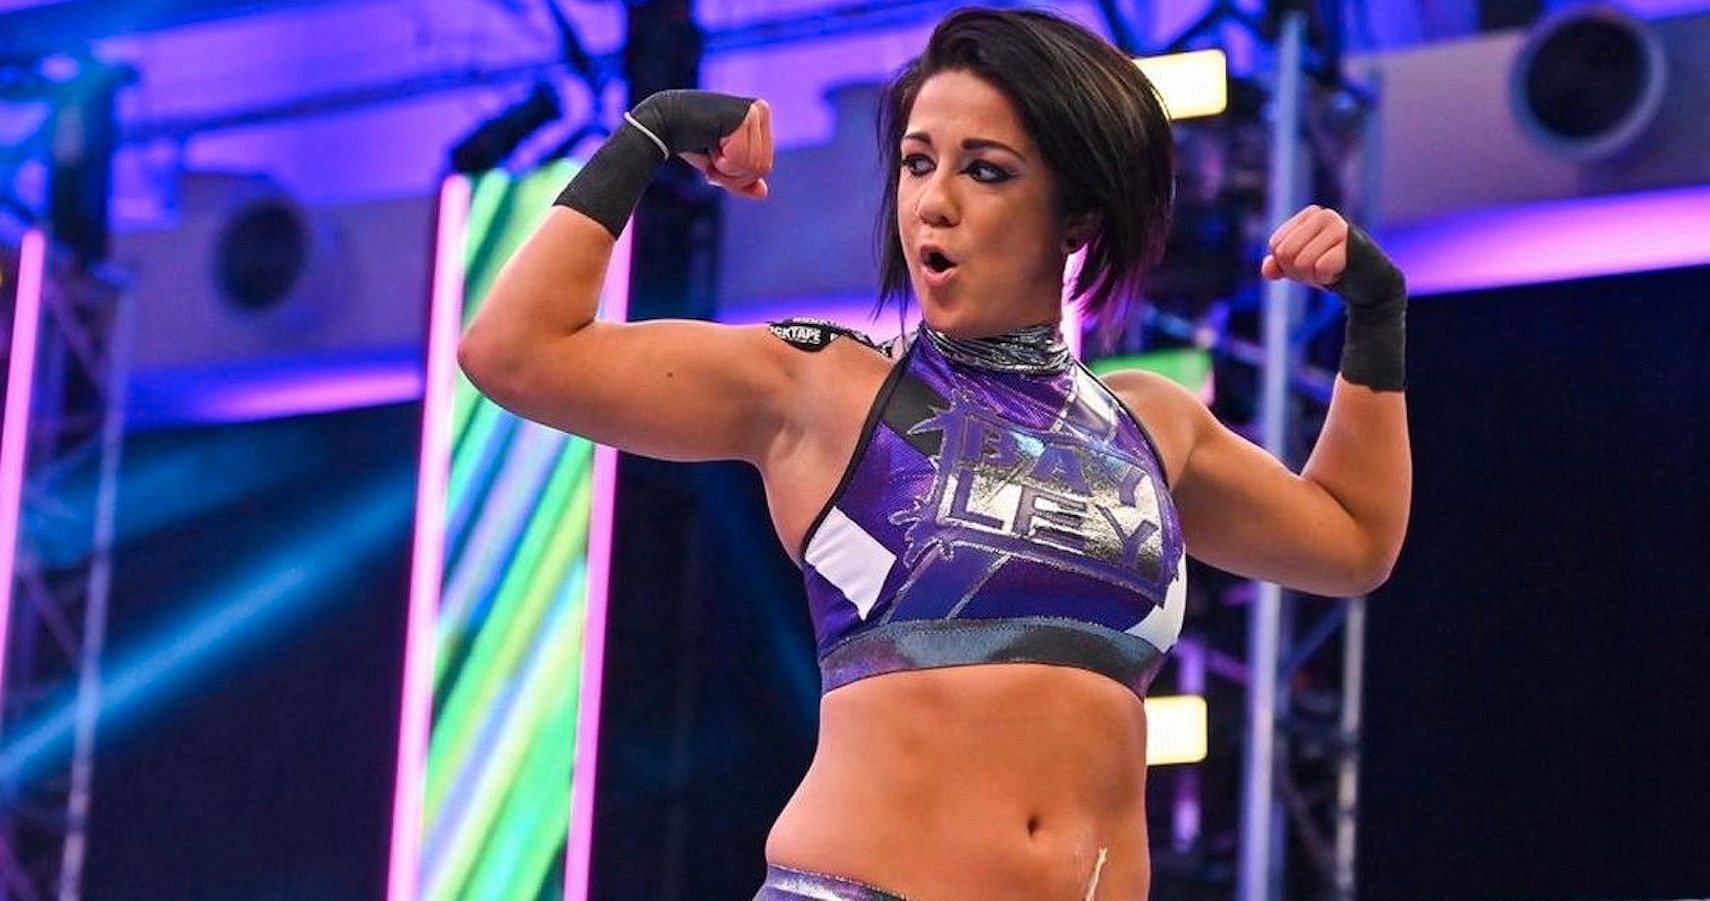 The Role Model will look to become the sixth woman to win a Royal Rumble